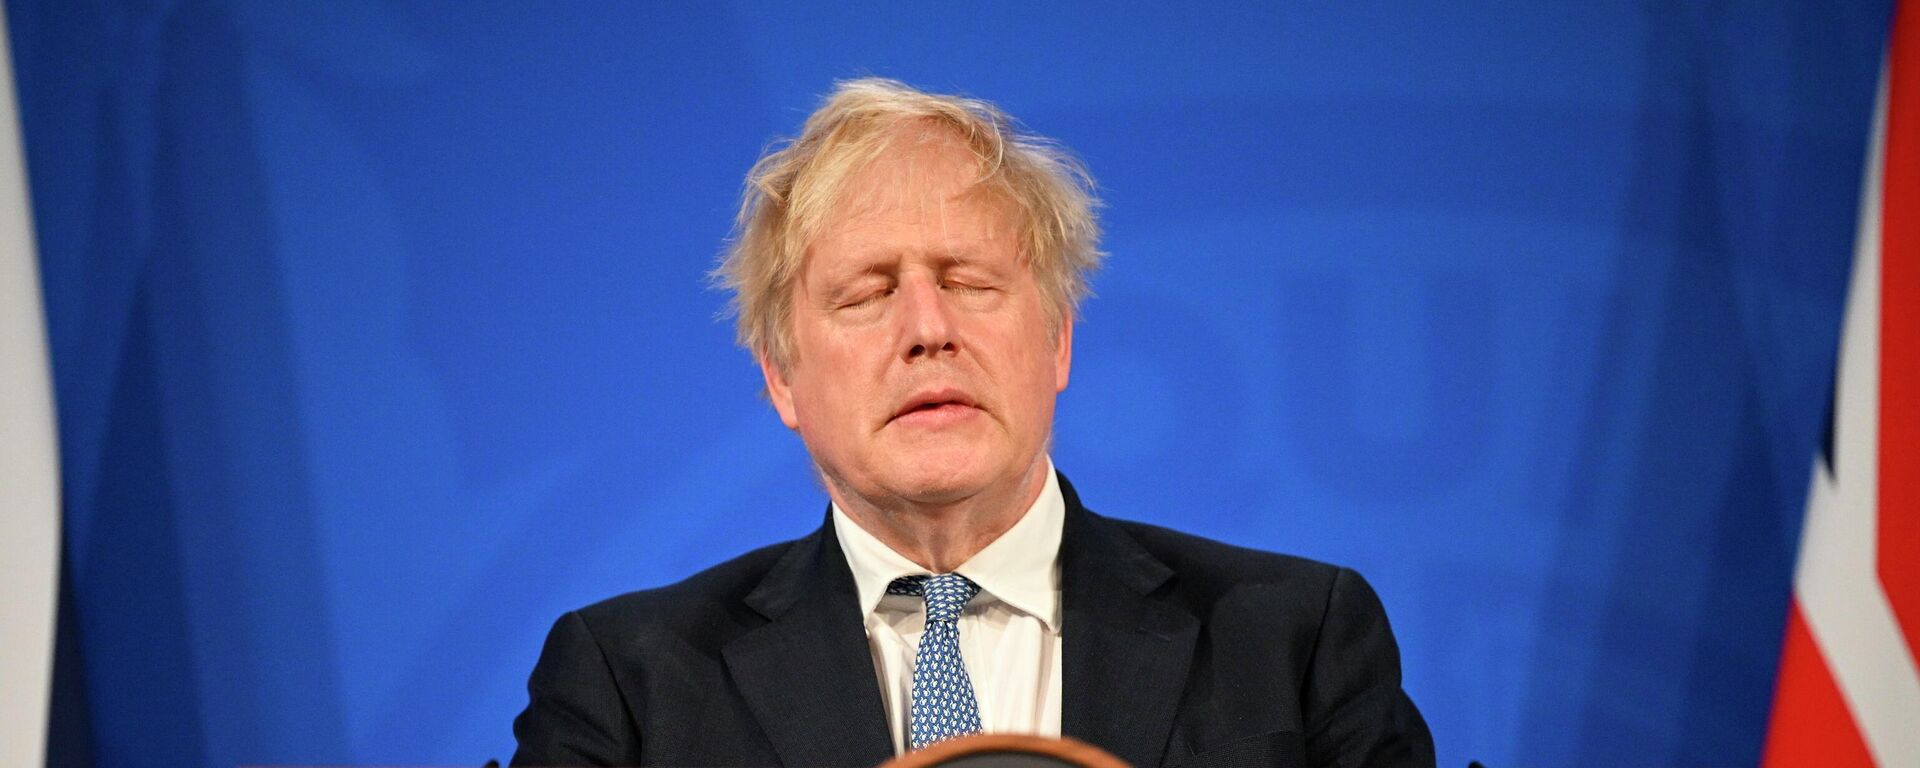 FILE - Britain's Prime Minister Boris Johnson speaks during a press conference in Downing Street, London, Wednesday, May 25 2022, following the publication of Sue Gray's report into Downing Street parties in Whitehall  - Sputnik International, 1920, 07.06.2022